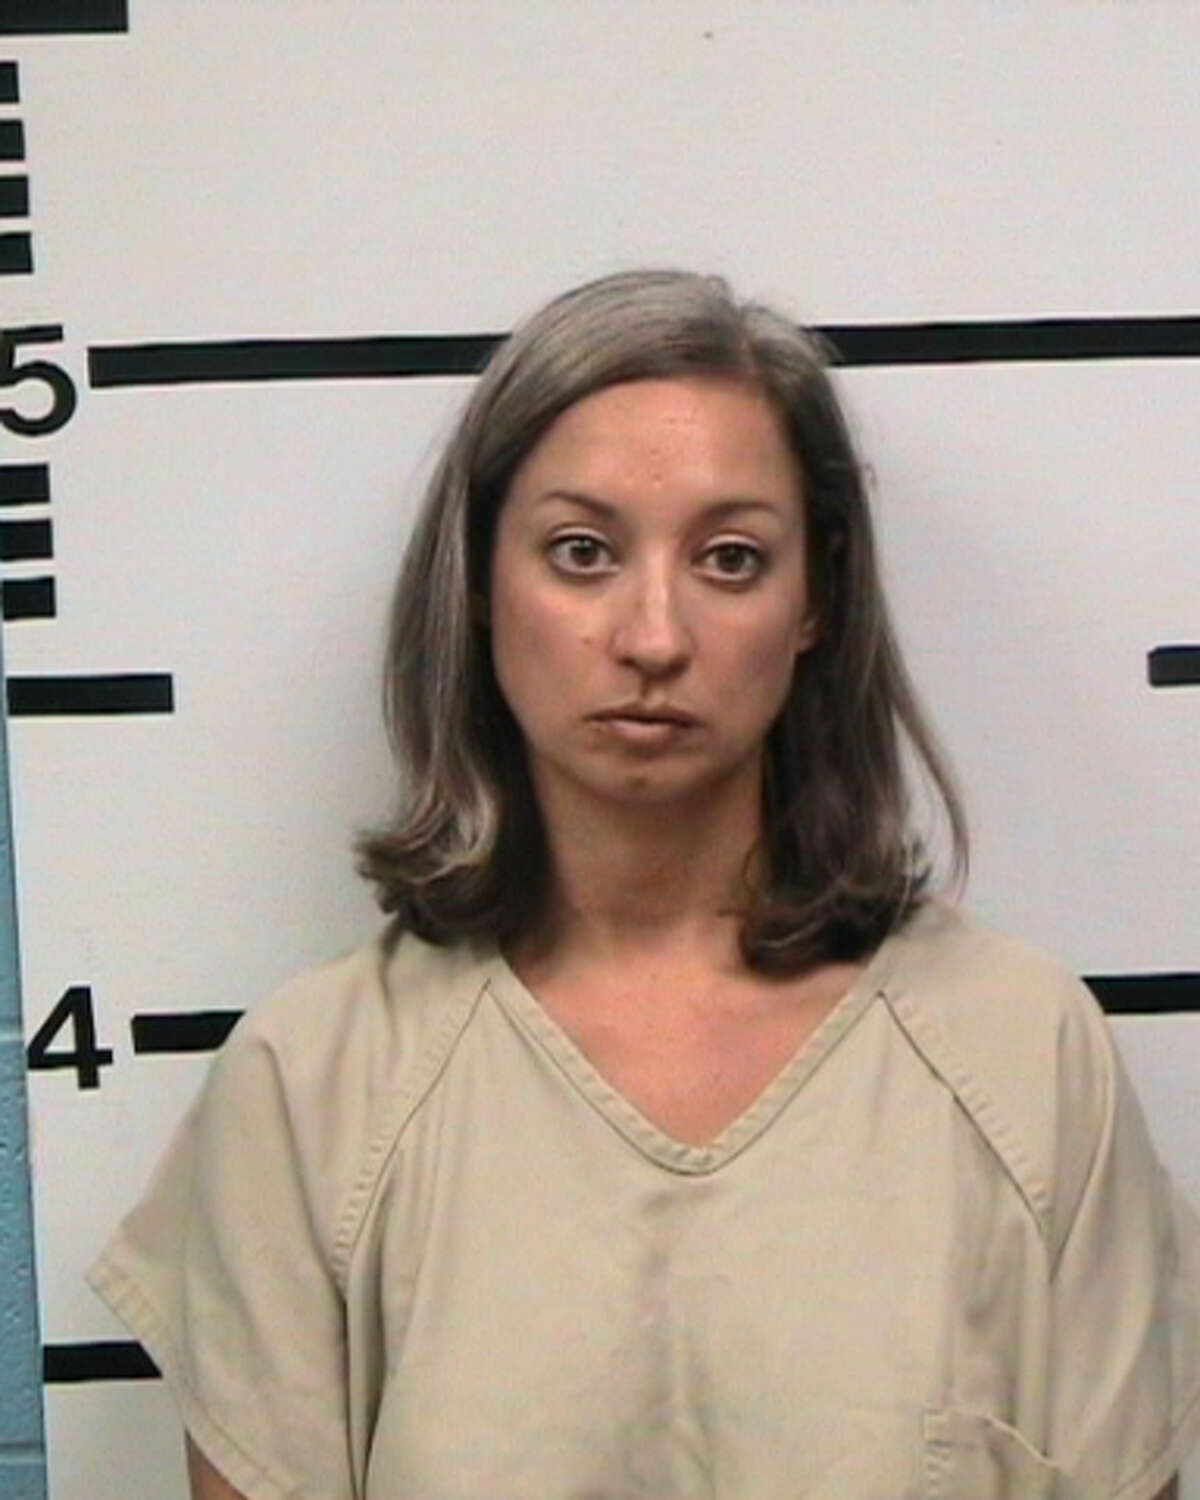 Sara Kathryn D'Spain of Bandera, Texas, faces one charge of improper relationship between an educator and student after she was arrested in September 2017. She was booked into the Kerr County Jail on a $35,000 bond and has since bailed out. D'Spain worked at Tivy High School in Kerrvile.